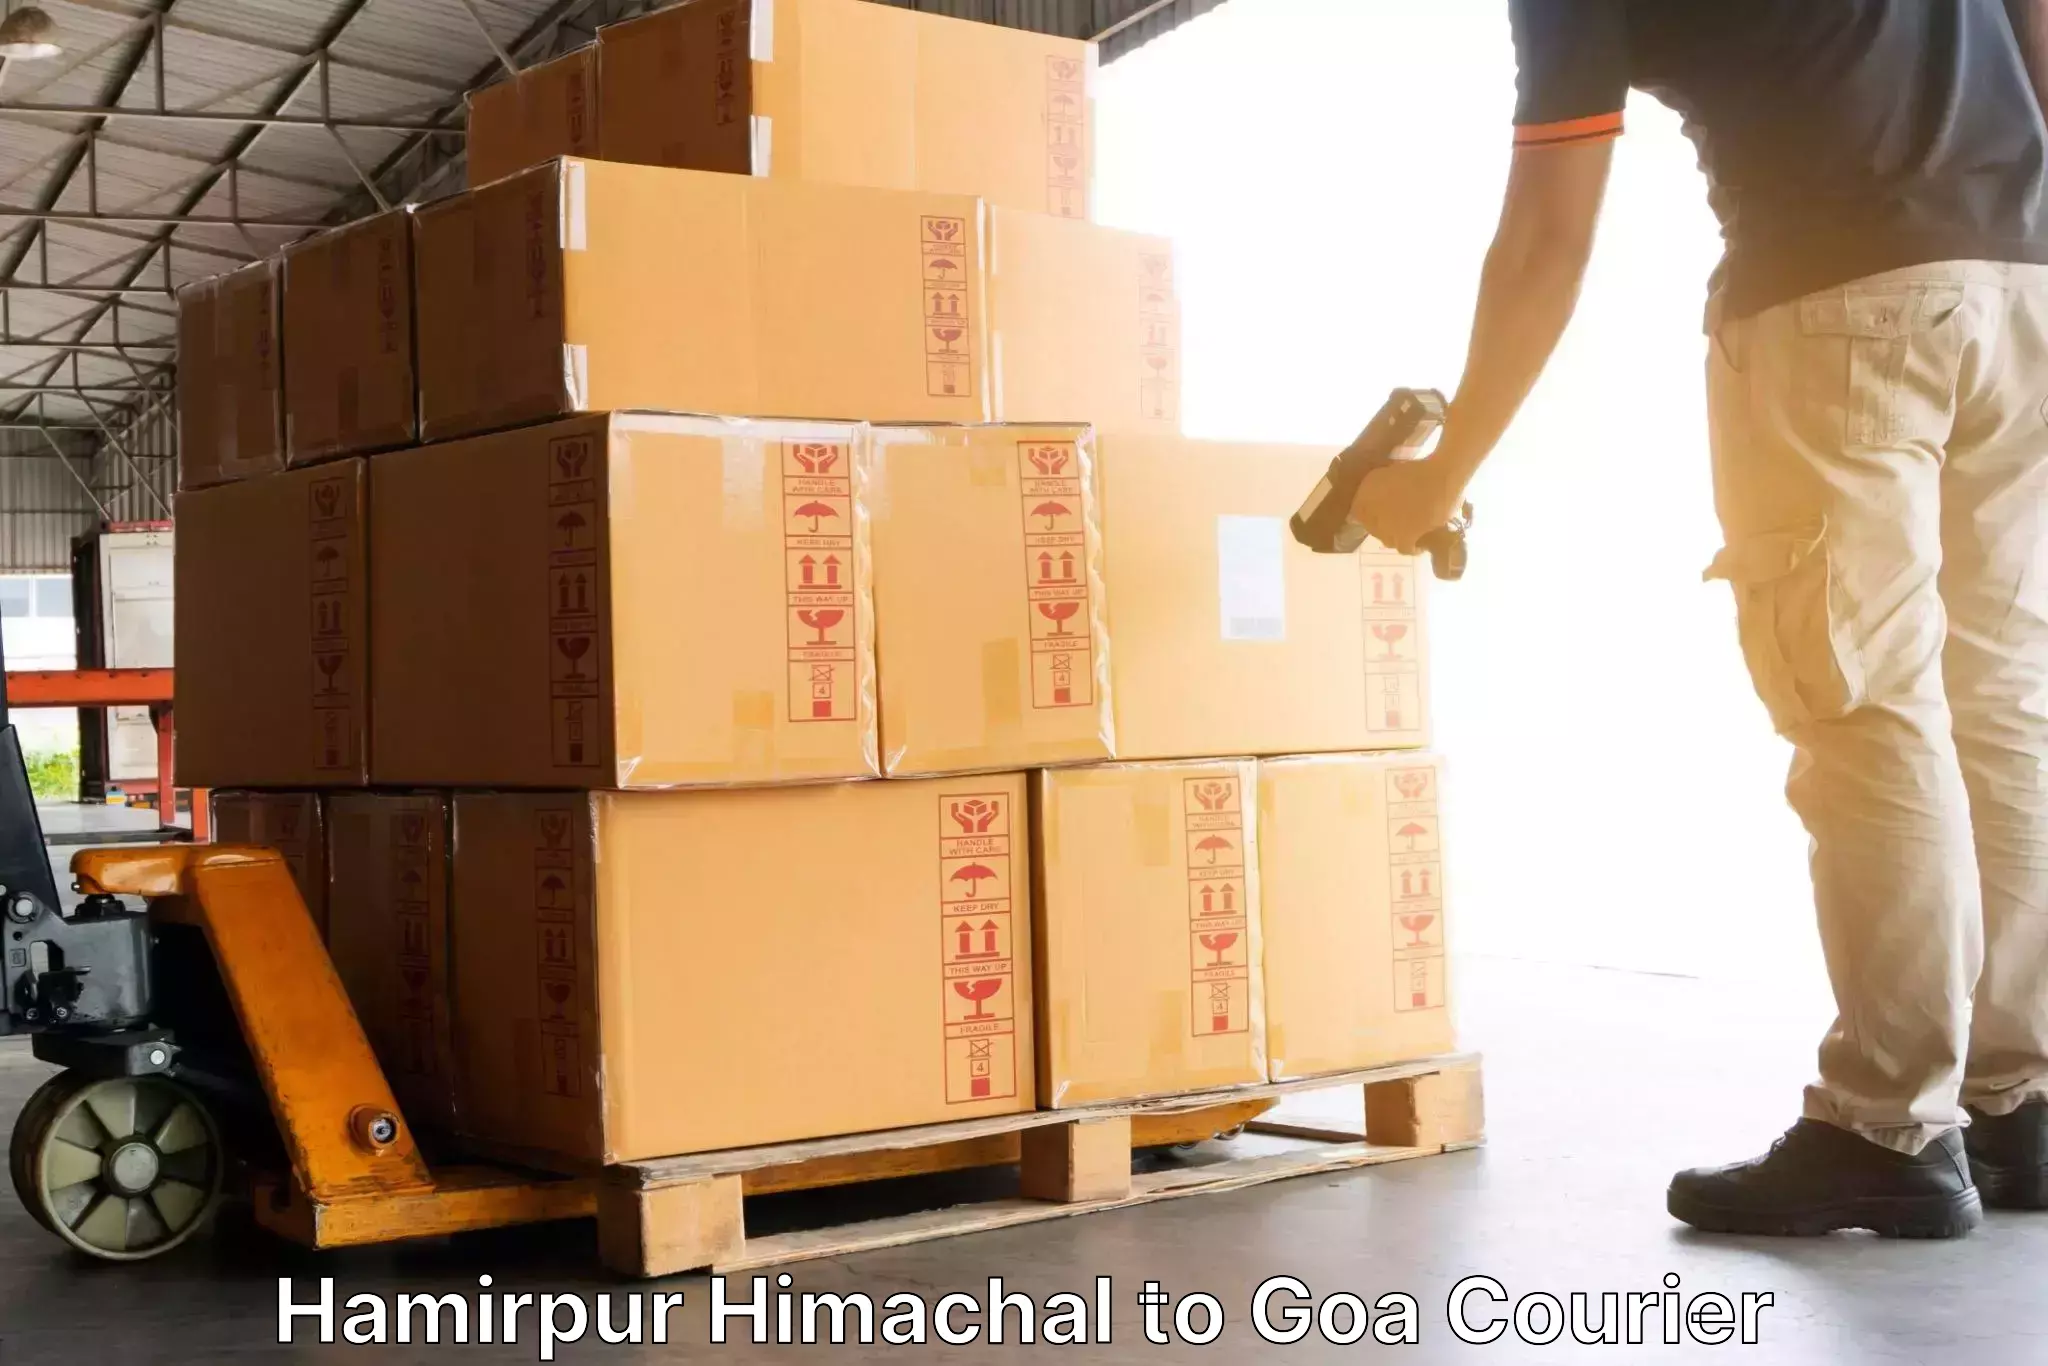 Easy access courier services Hamirpur Himachal to Goa